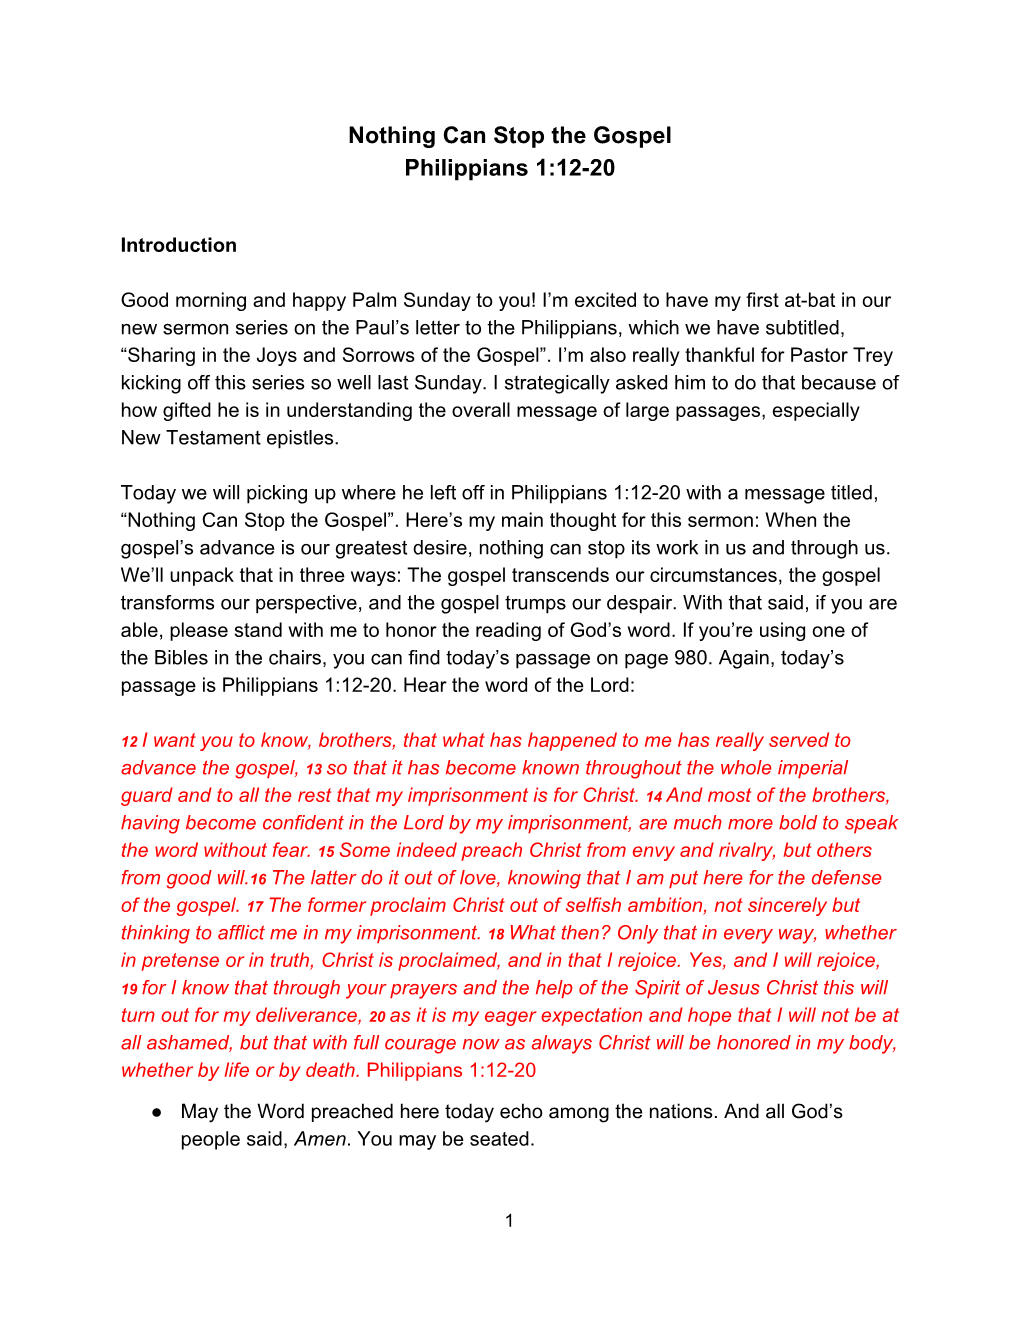 Nothing Can Stop the Gospel Philippians 1:12-20